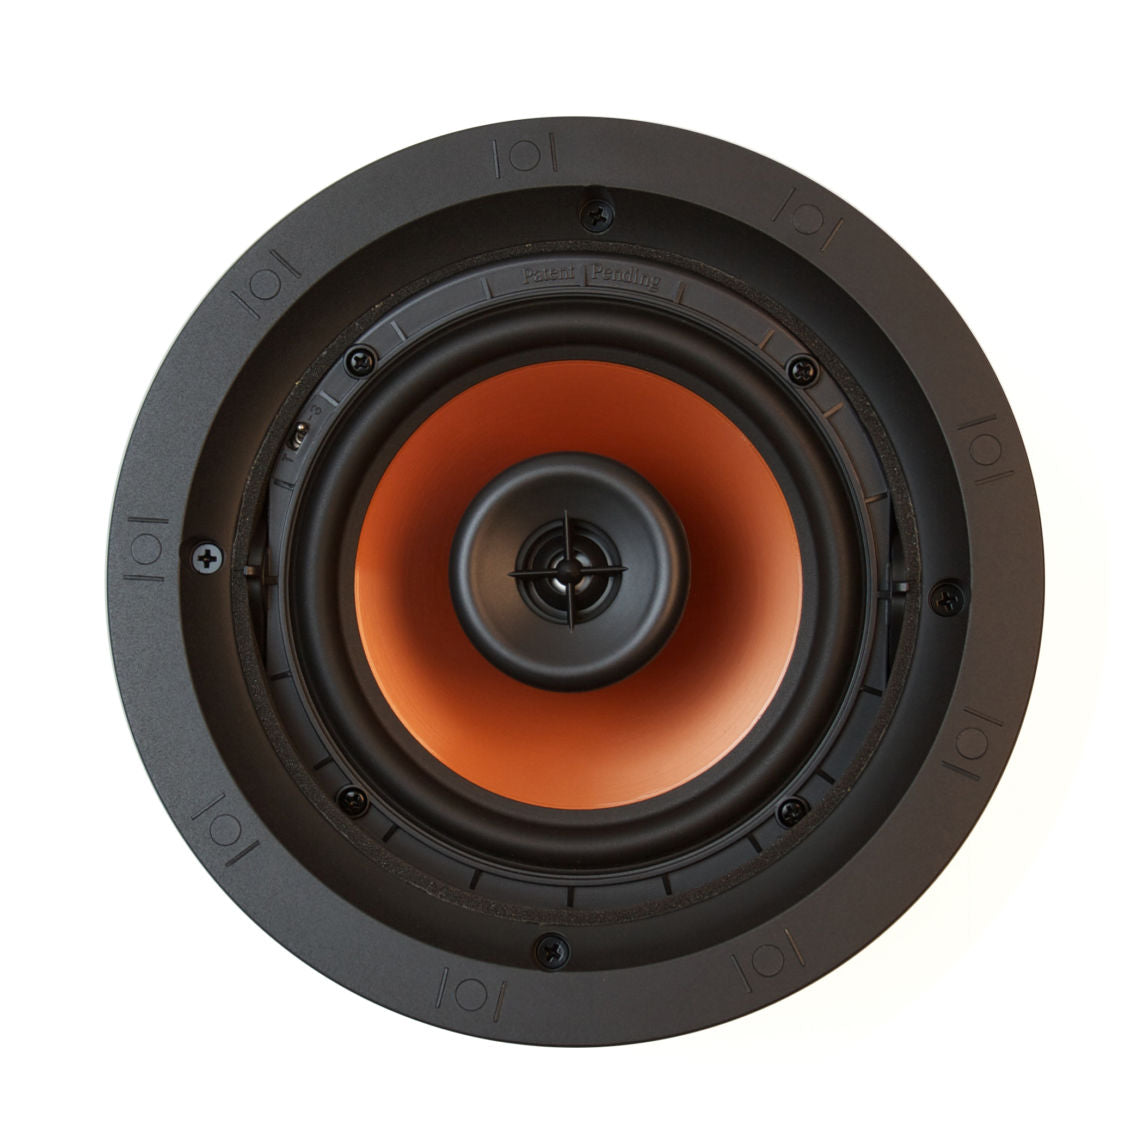 KLIPSCH CDT-3650-C II IN-CEILING SPEAKER With integrated whole-house audio systems becoming more popular than ever, Klipsch designed the CDT-3800-C II to meet the market's demand for a high-performance in-ceiling loudspeaker that easily challenges the inherent limitations of fixed locations. Features: 1" Aluminum Tweeter 8" Pivoting IMG Woofer Horn-loaded technology Controlled Dispersion Technology (CDT) Treble attenuation switch Elegant new, low-profile SlimTrim™ magnetic grille